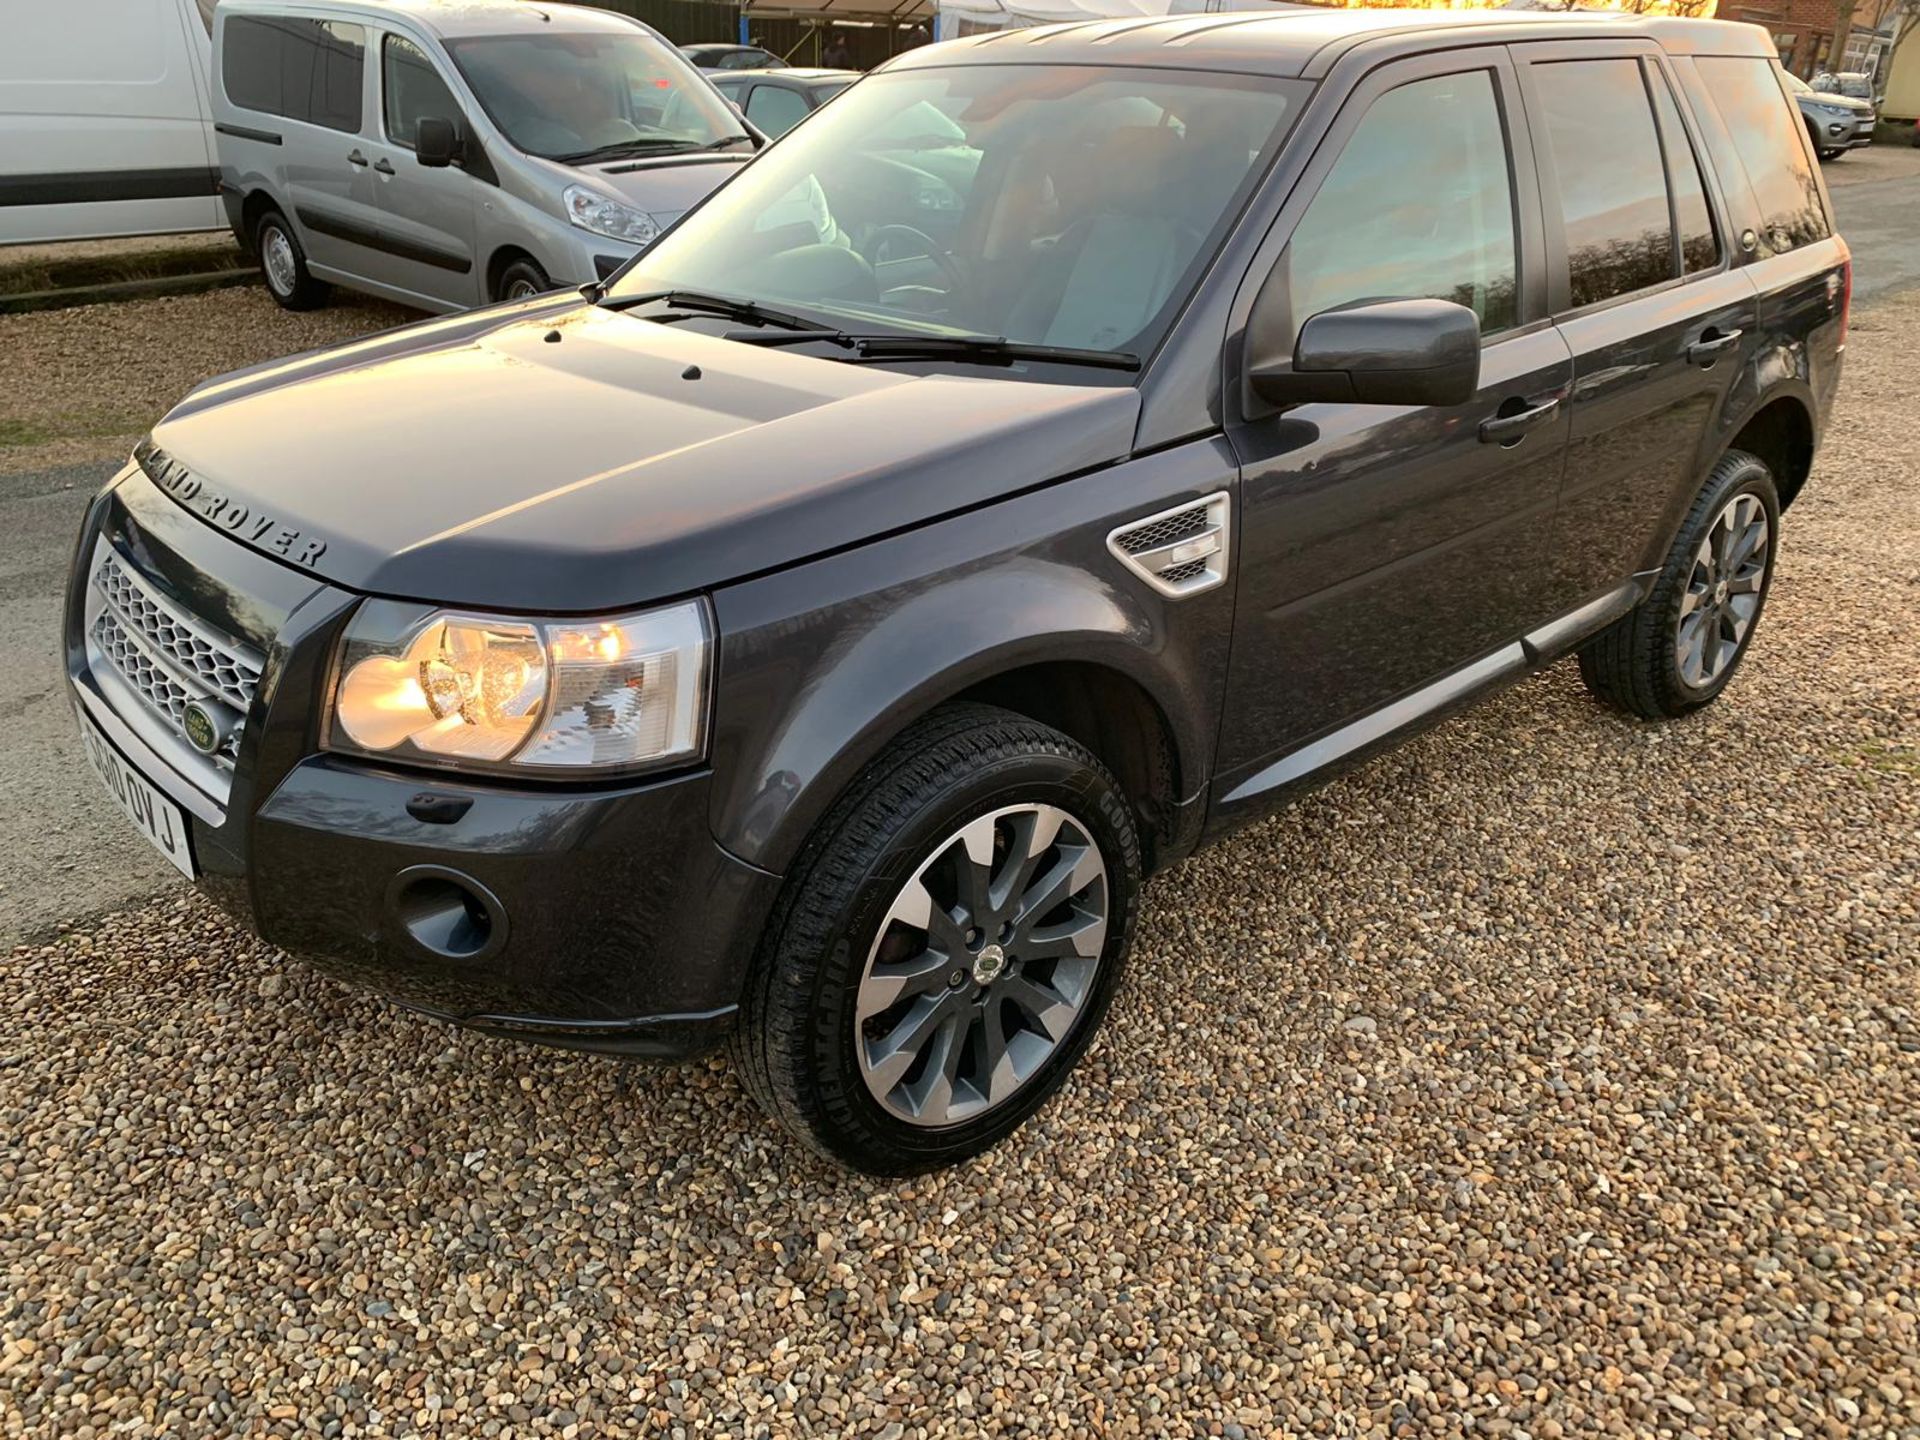 2010/10 REG LAND ROVER FREELANDER SPORT LE TD4 2.2 DIESEL AUTO 4X4, SHOWING 2 FORMER KEEPERS - Image 4 of 13